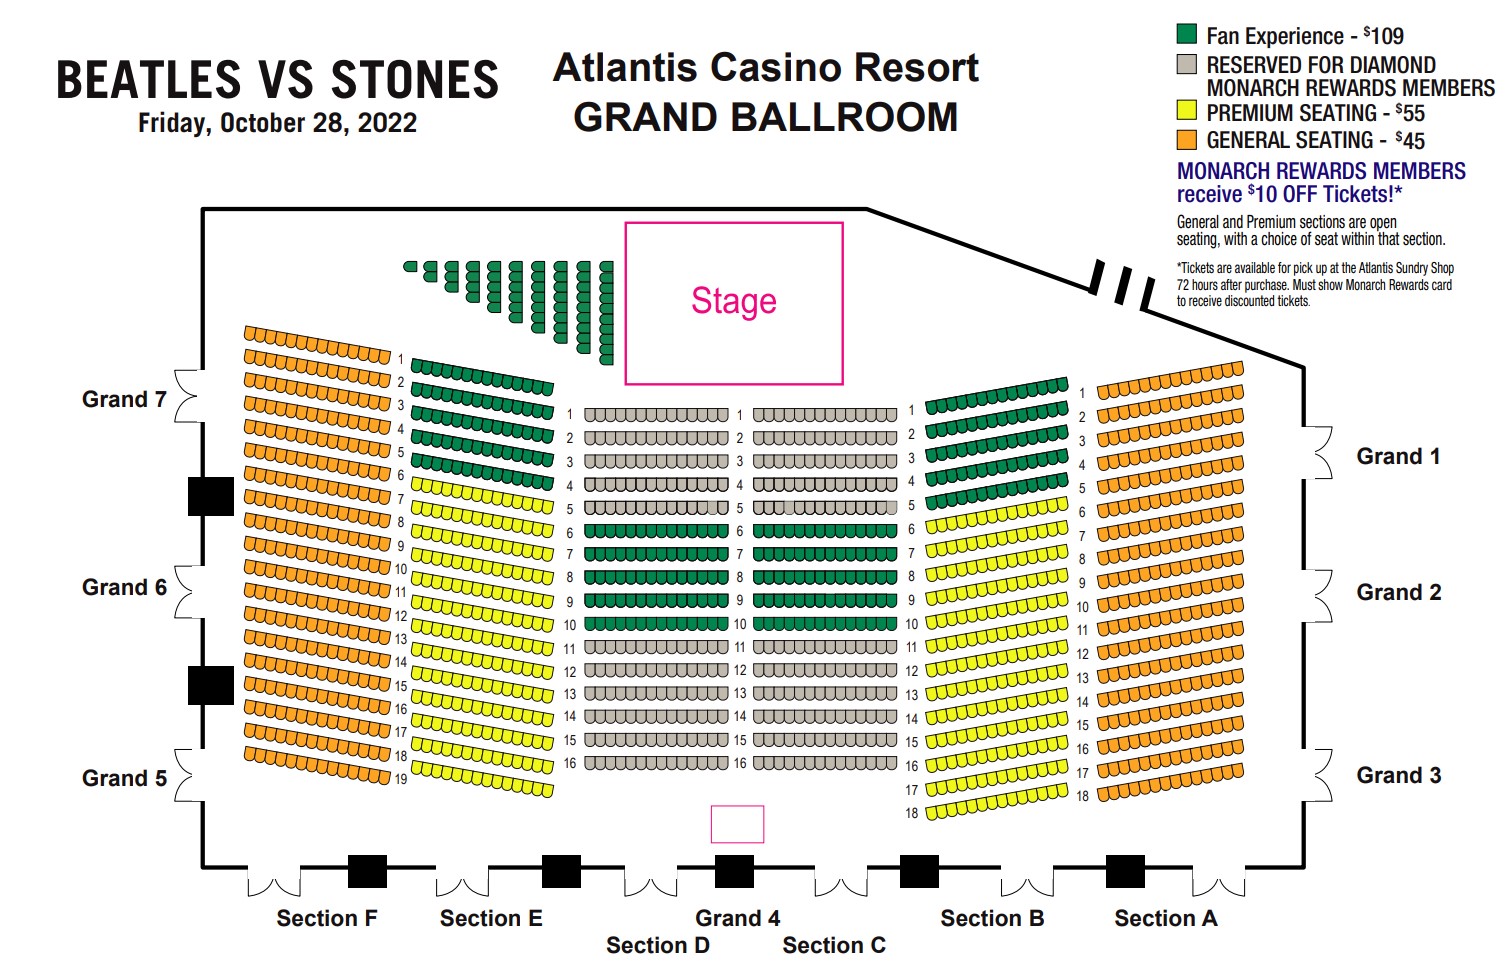 Seating Chart for Beatles vs Stones